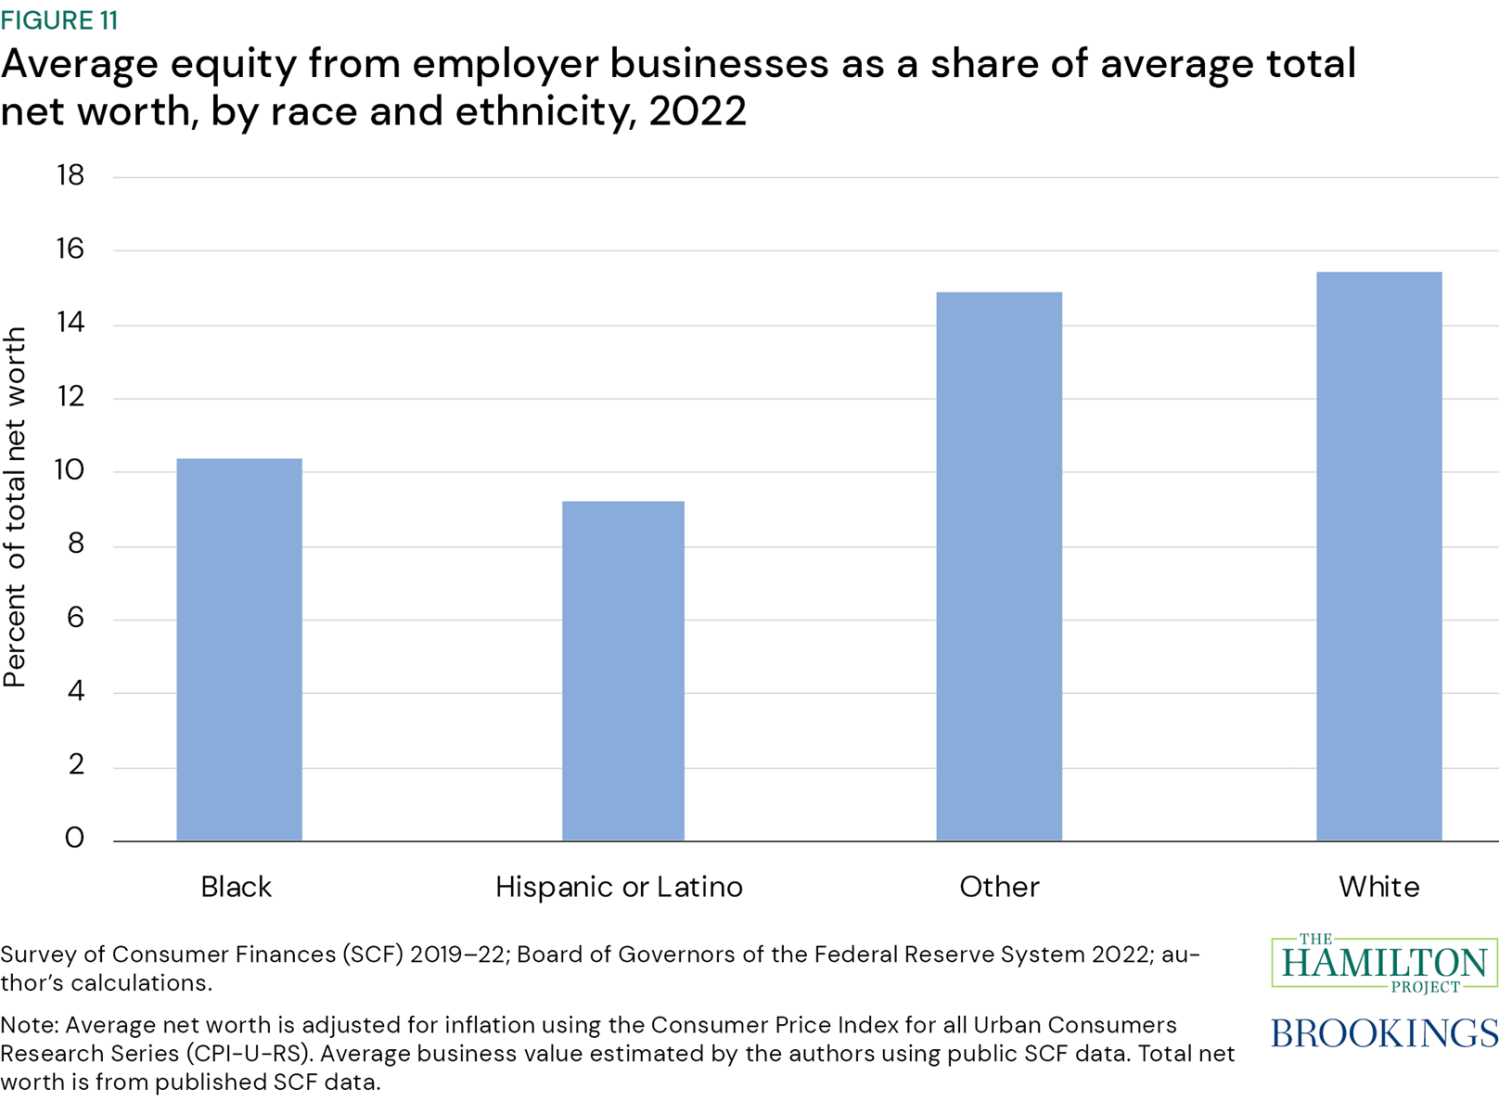 Figure 11: Average equity from employer businesses as a share of average total net worth, by race and ethnicity, 2022. Figure 11 shows average equity in employer businesses as a share of average total net worth, by race and ethnicity.